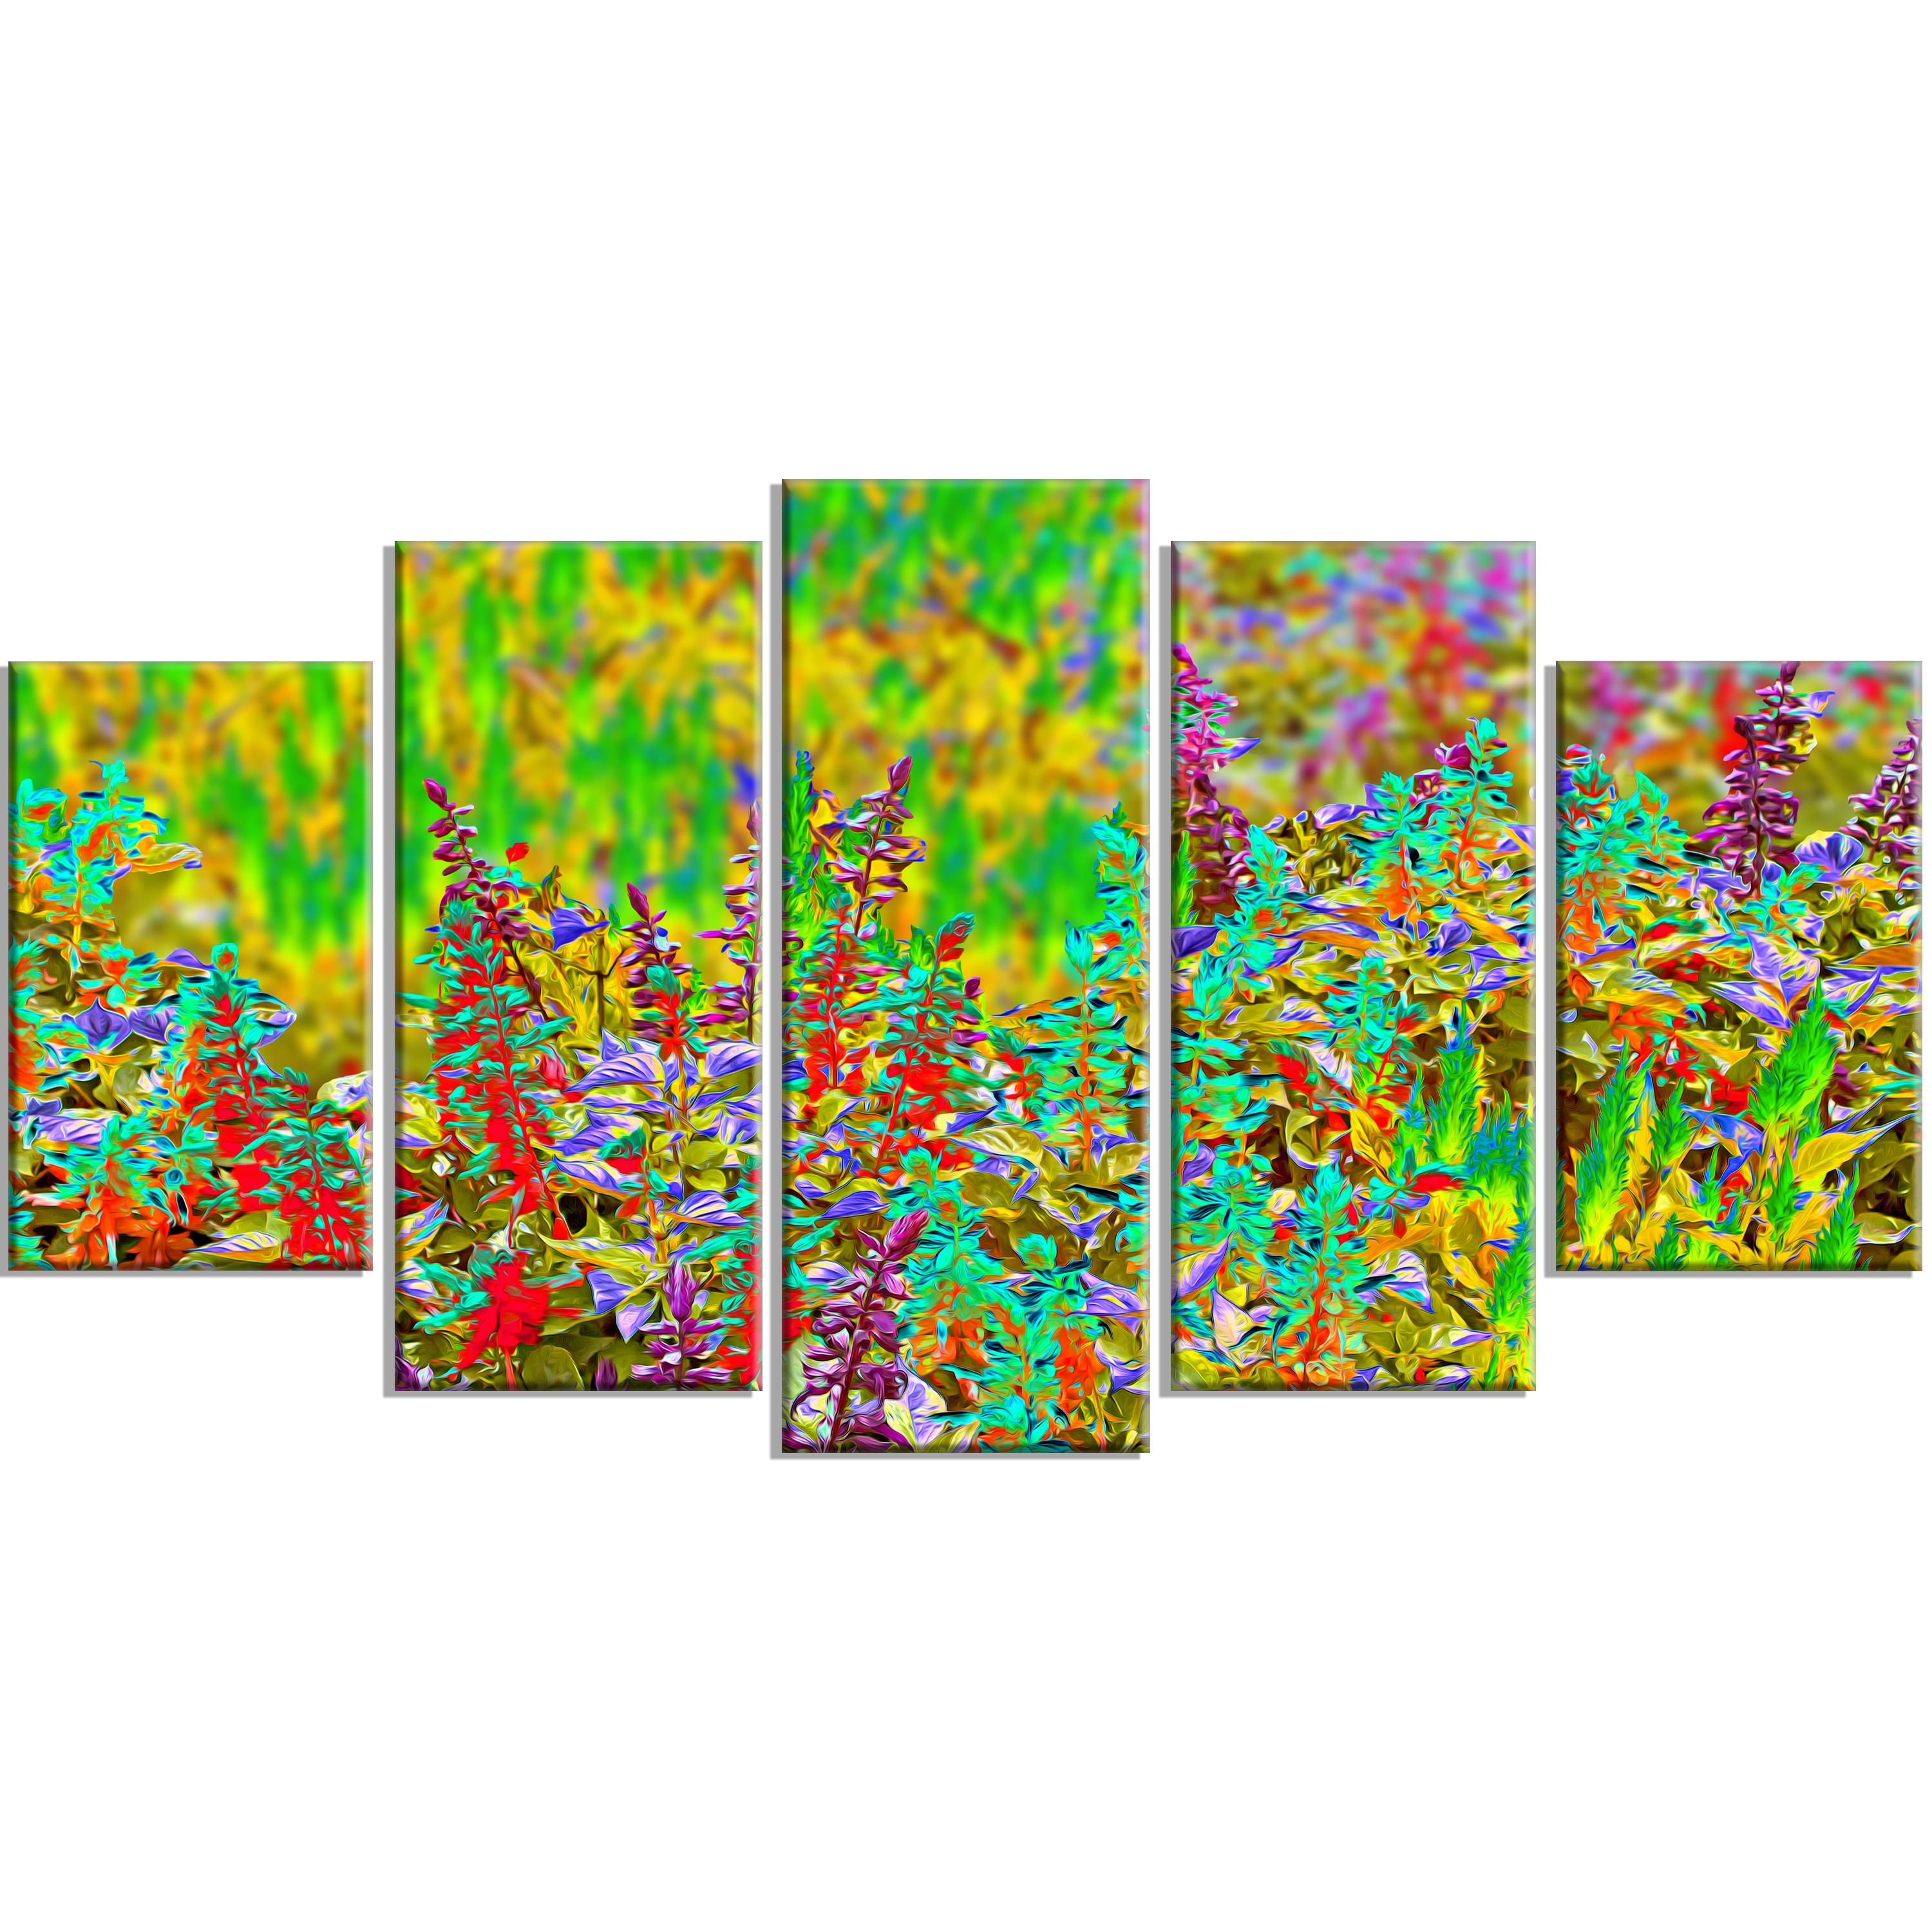 Colorful Textured Flowerbed - Floral Art Canvas Print - Small | eBay